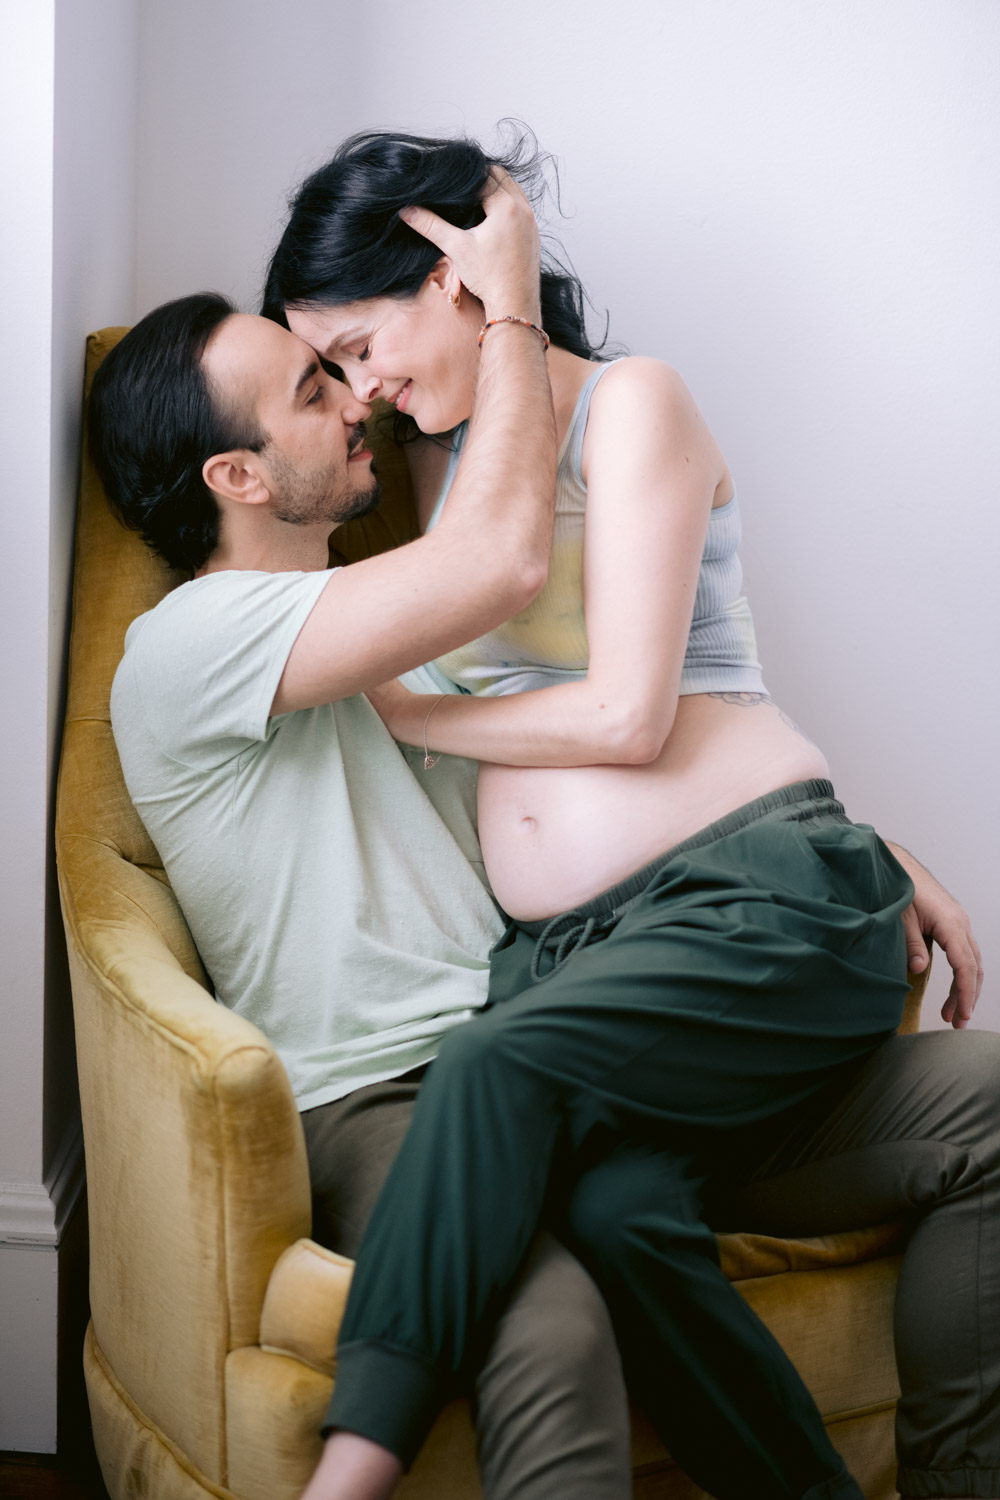 chicago maternity session photographer